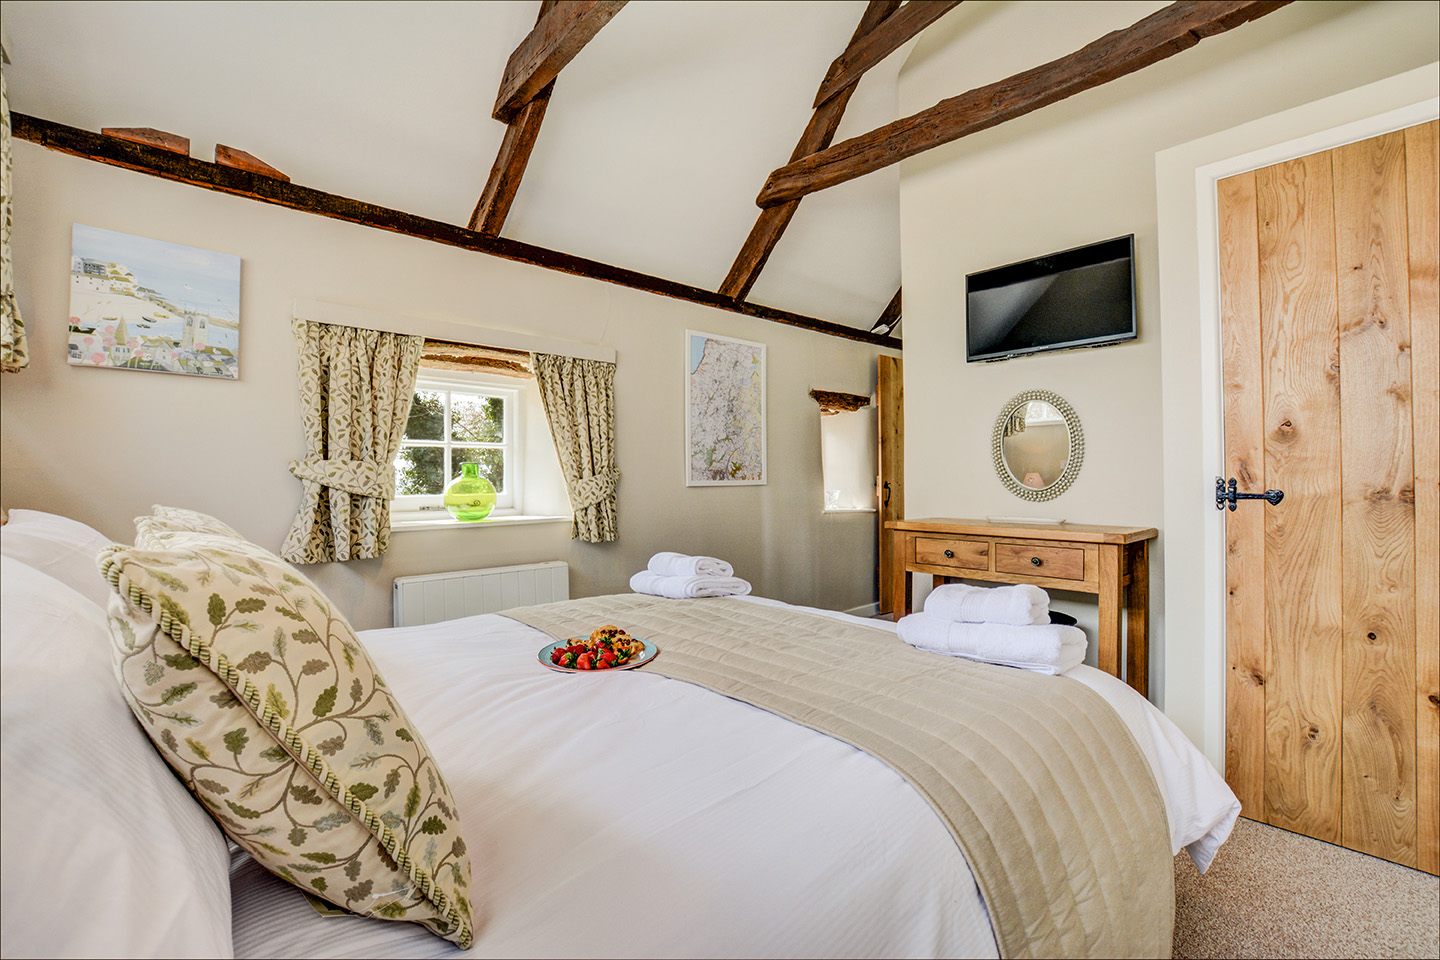 The bedroom at Jingles luxury self catering holiday cottage at Penrose Burden in North Cornwall near Bodmin Moor03.jpg